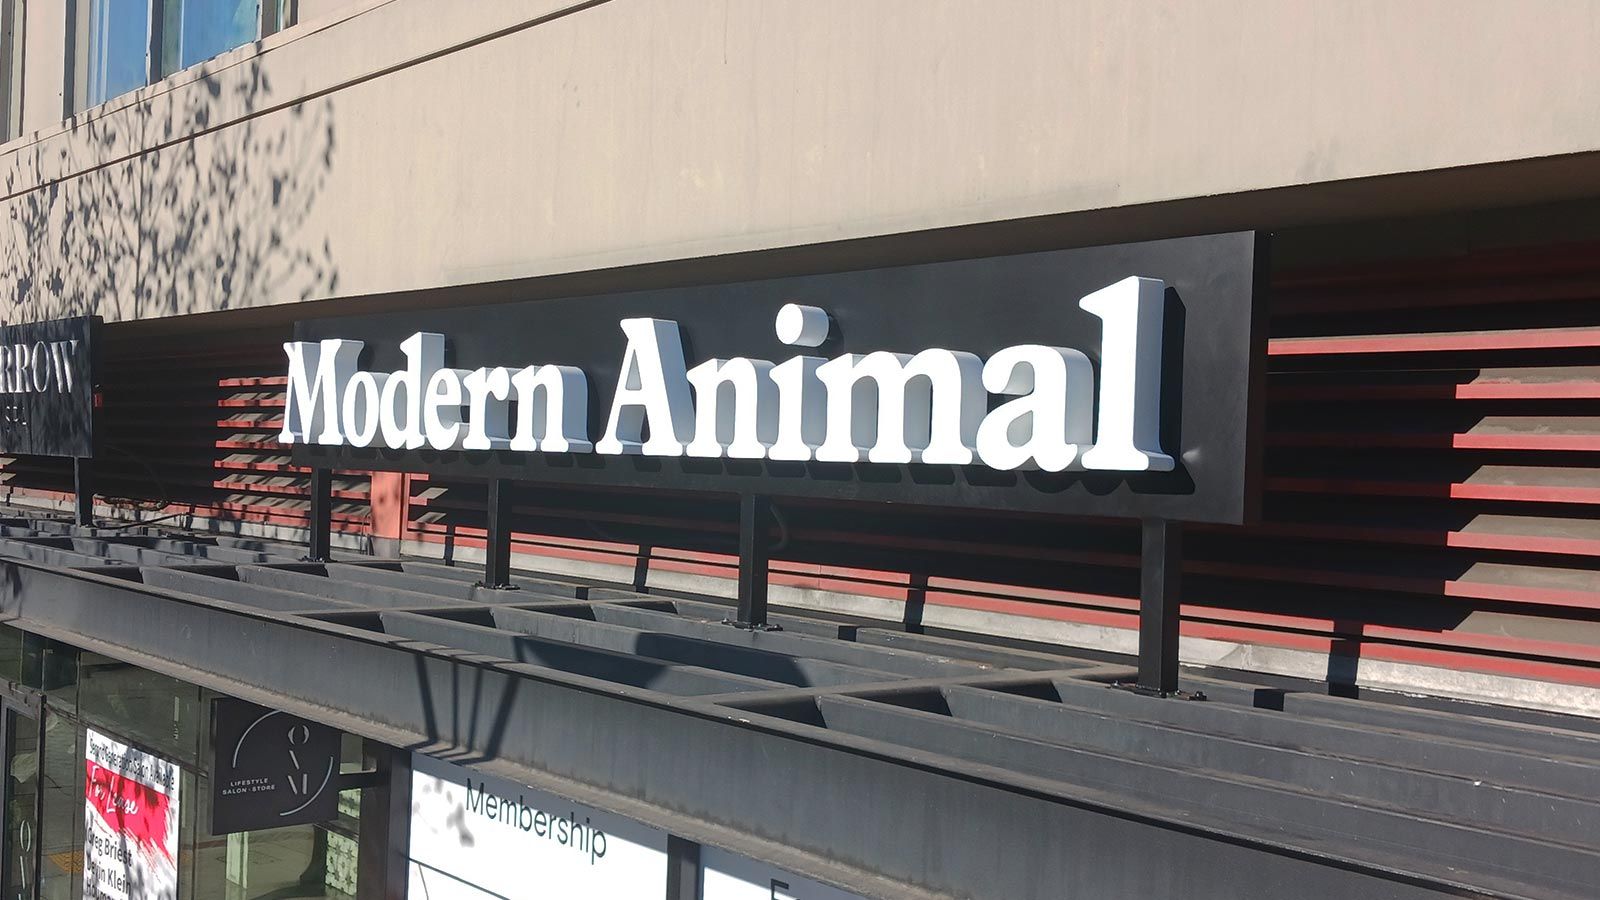 Modern Animal building sign decorating the facade